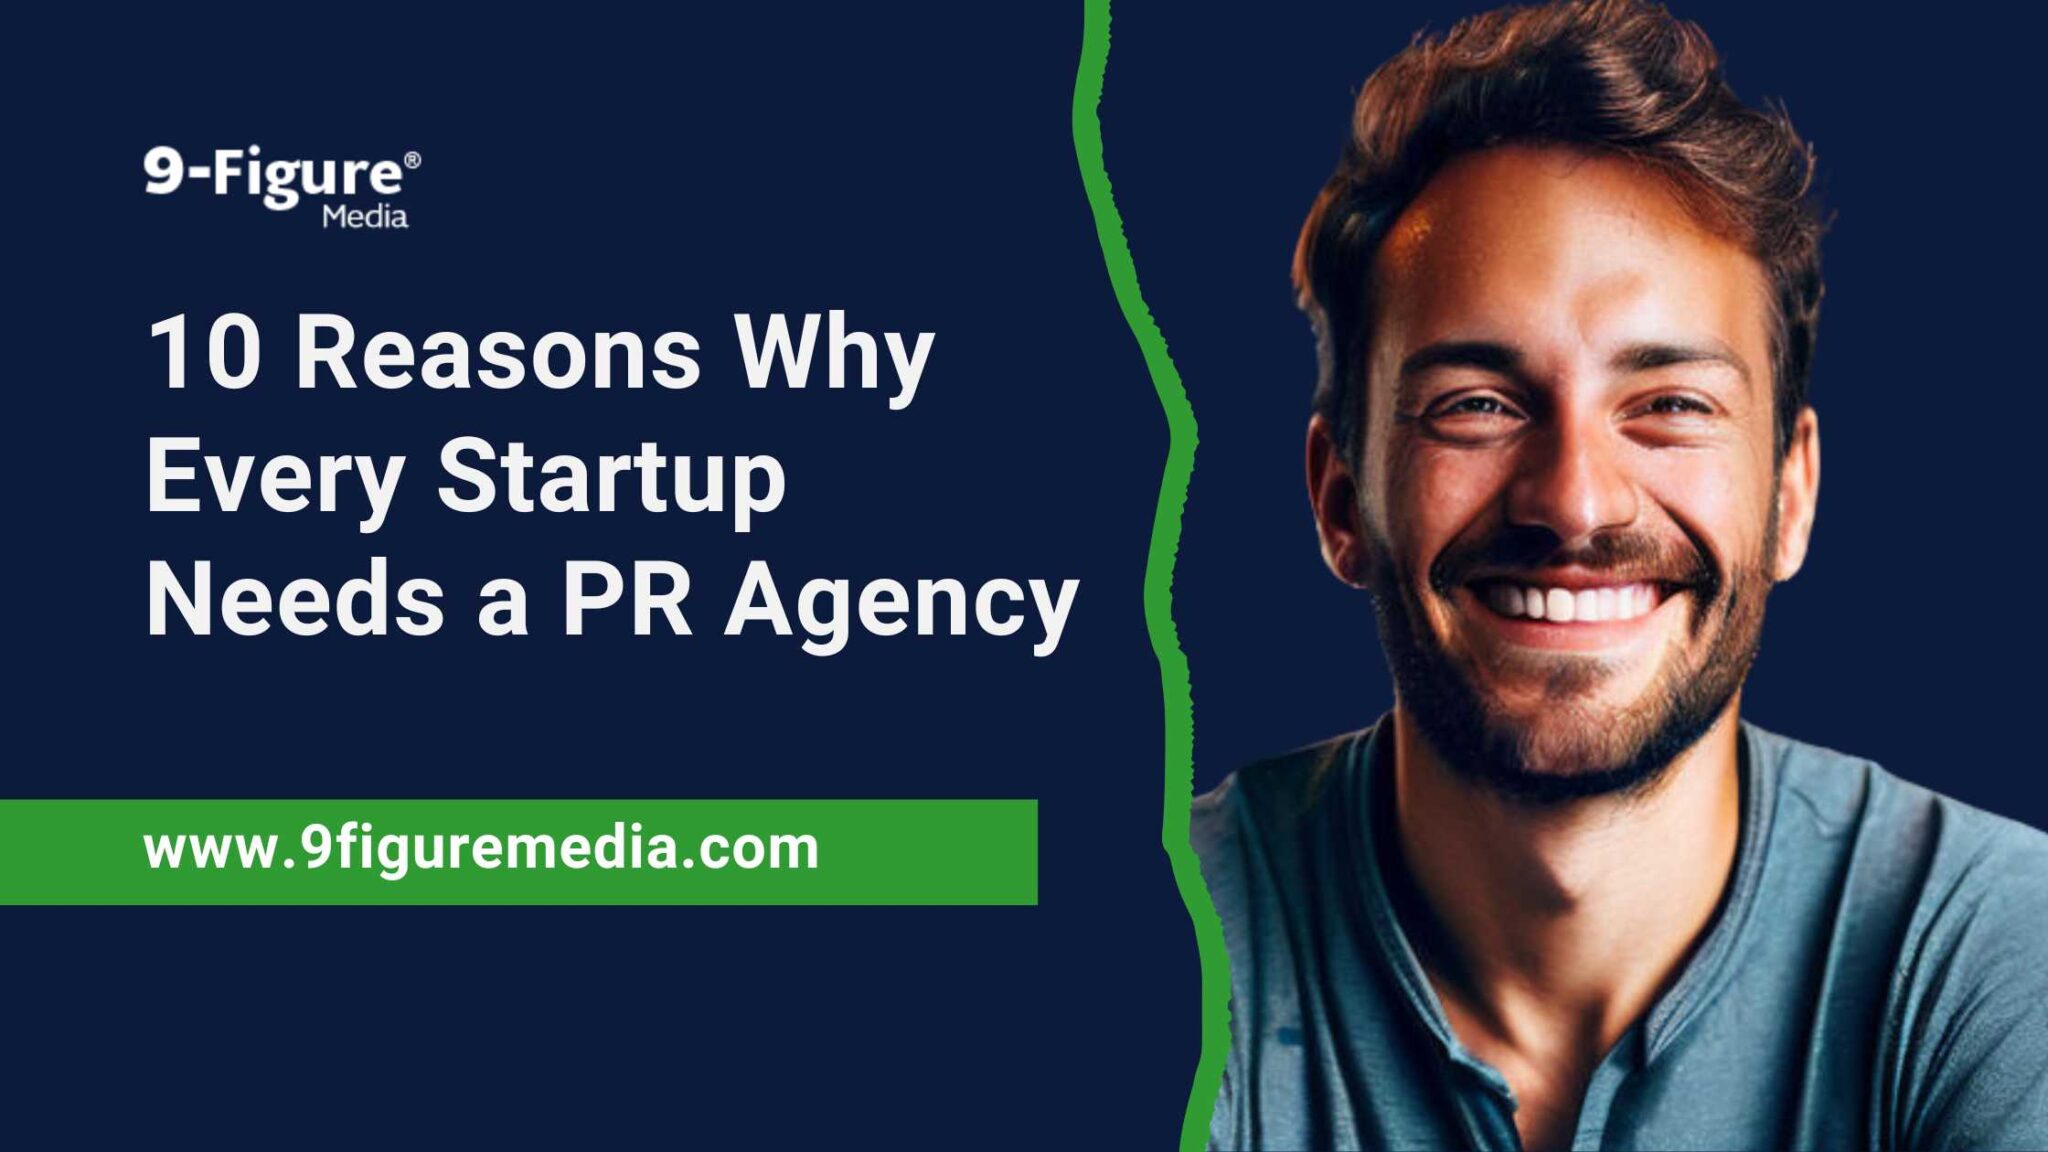 10 Reasons Why Every Startup Needs a PR Agency